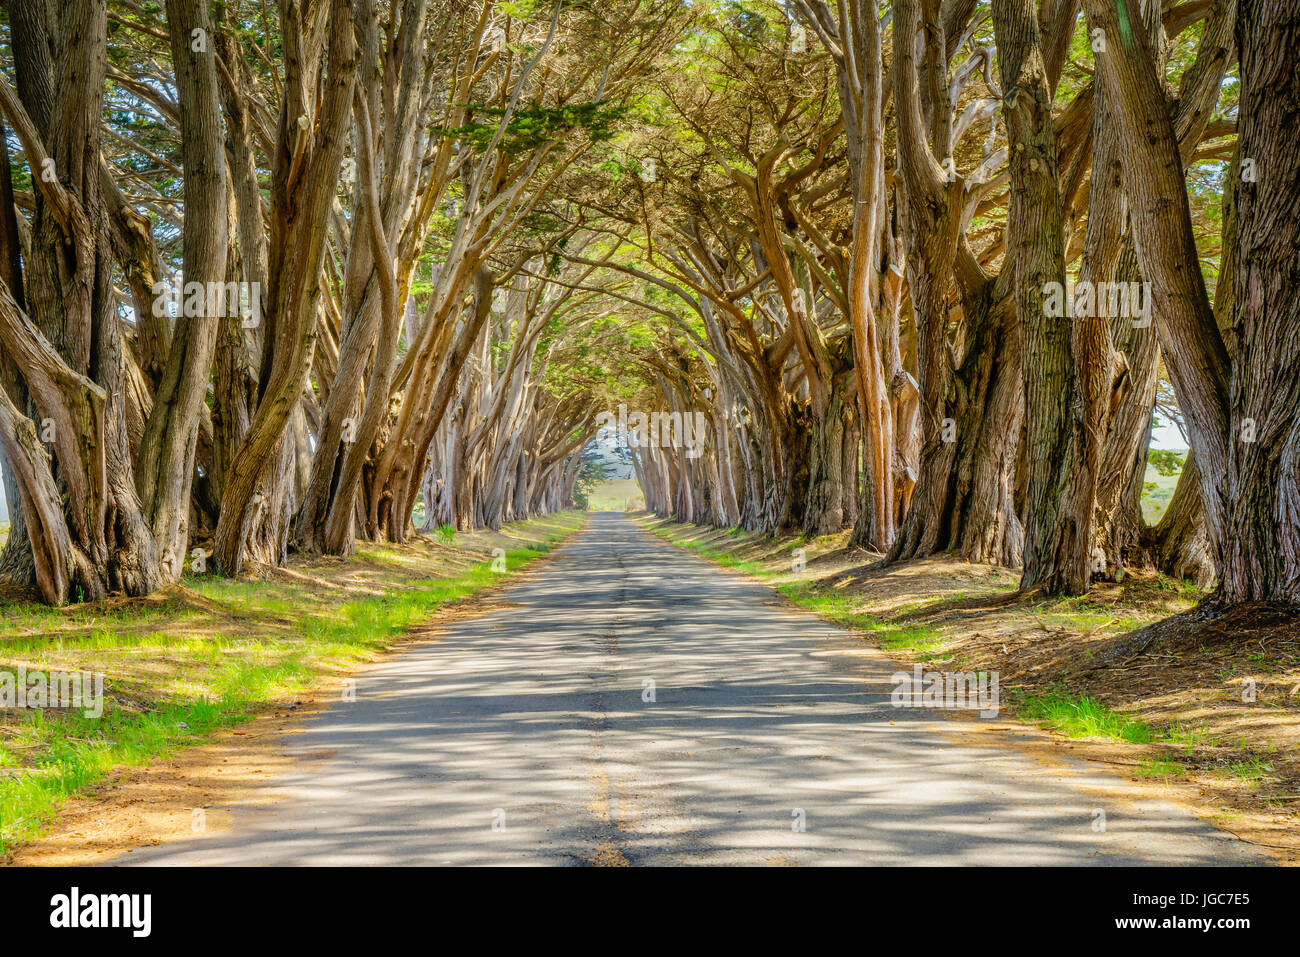 The Monterey cypress “tree tunnel” at the Point Reyes station is a signature landscape feature of the Point Reyes National Seashore in California Stock Photo